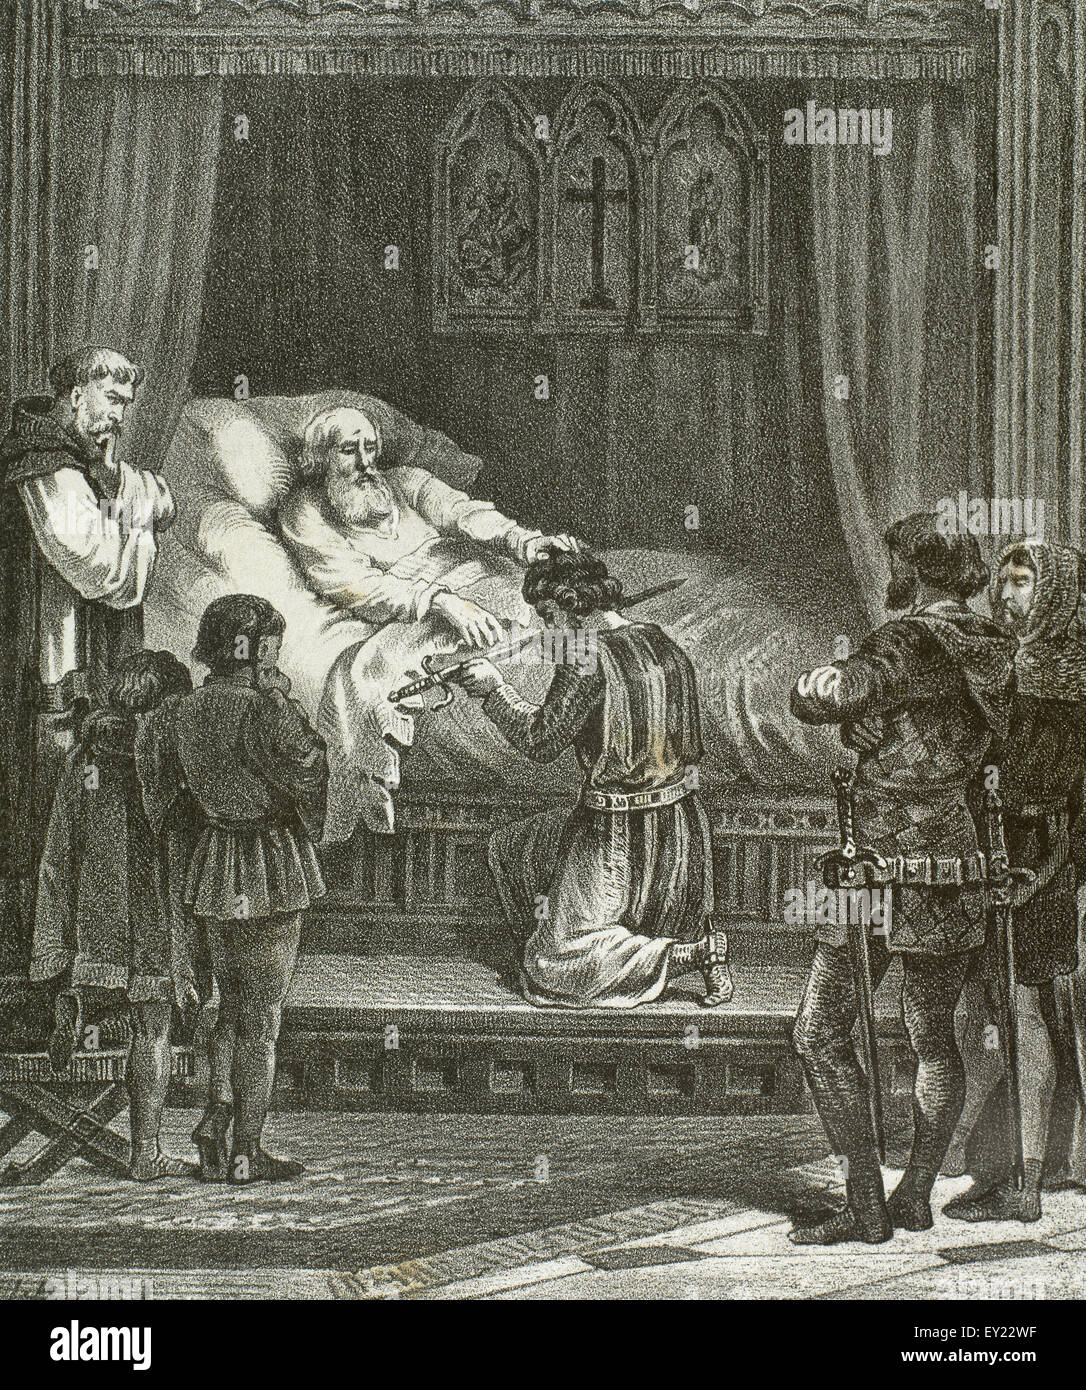 James I the Conqueror (1208-1276). King of Aragon. Last moments of James I. Ceremony of delivery of his sword to his son Dom Peter. Engraving in History of Spain, 19th century. Stock Photo